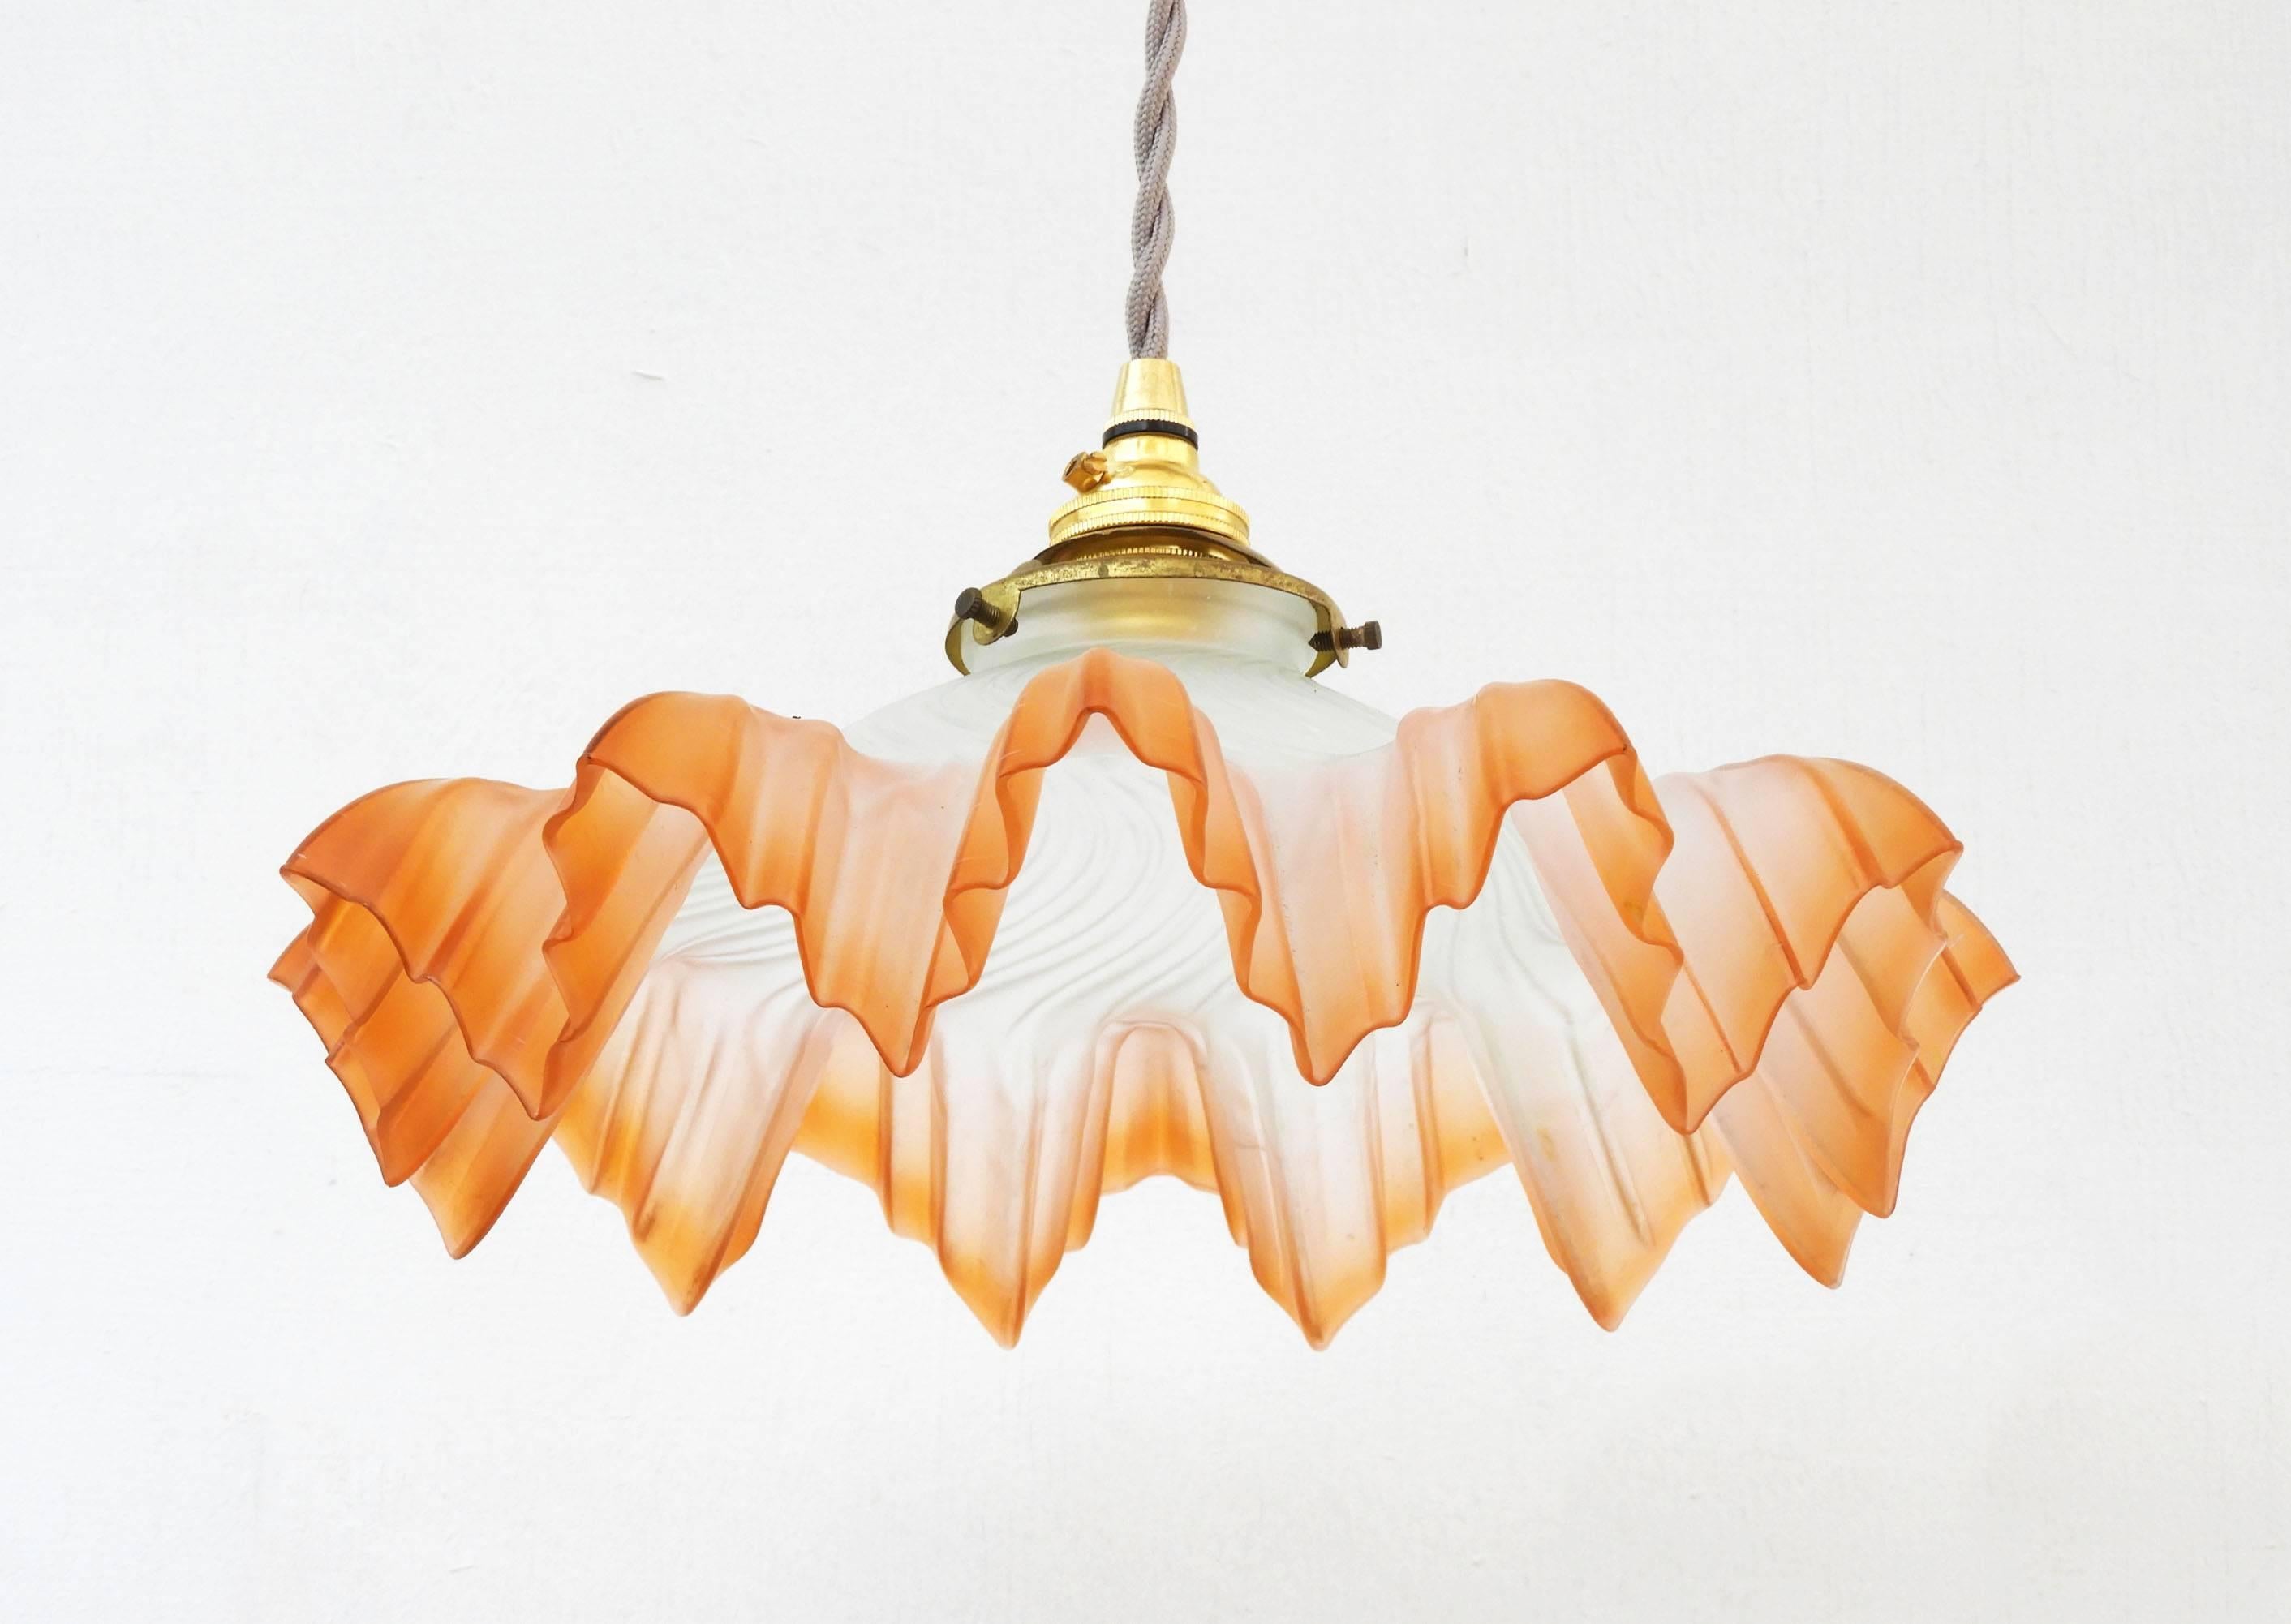 French glass handkerchief pendant ceiling light with orange-pink accents.
Belle Époque, circa 1910
In good original condition
This will be re-wired and tested to USA or UK and European standards ready to install.
Existing drop: 28.3inches 72cms